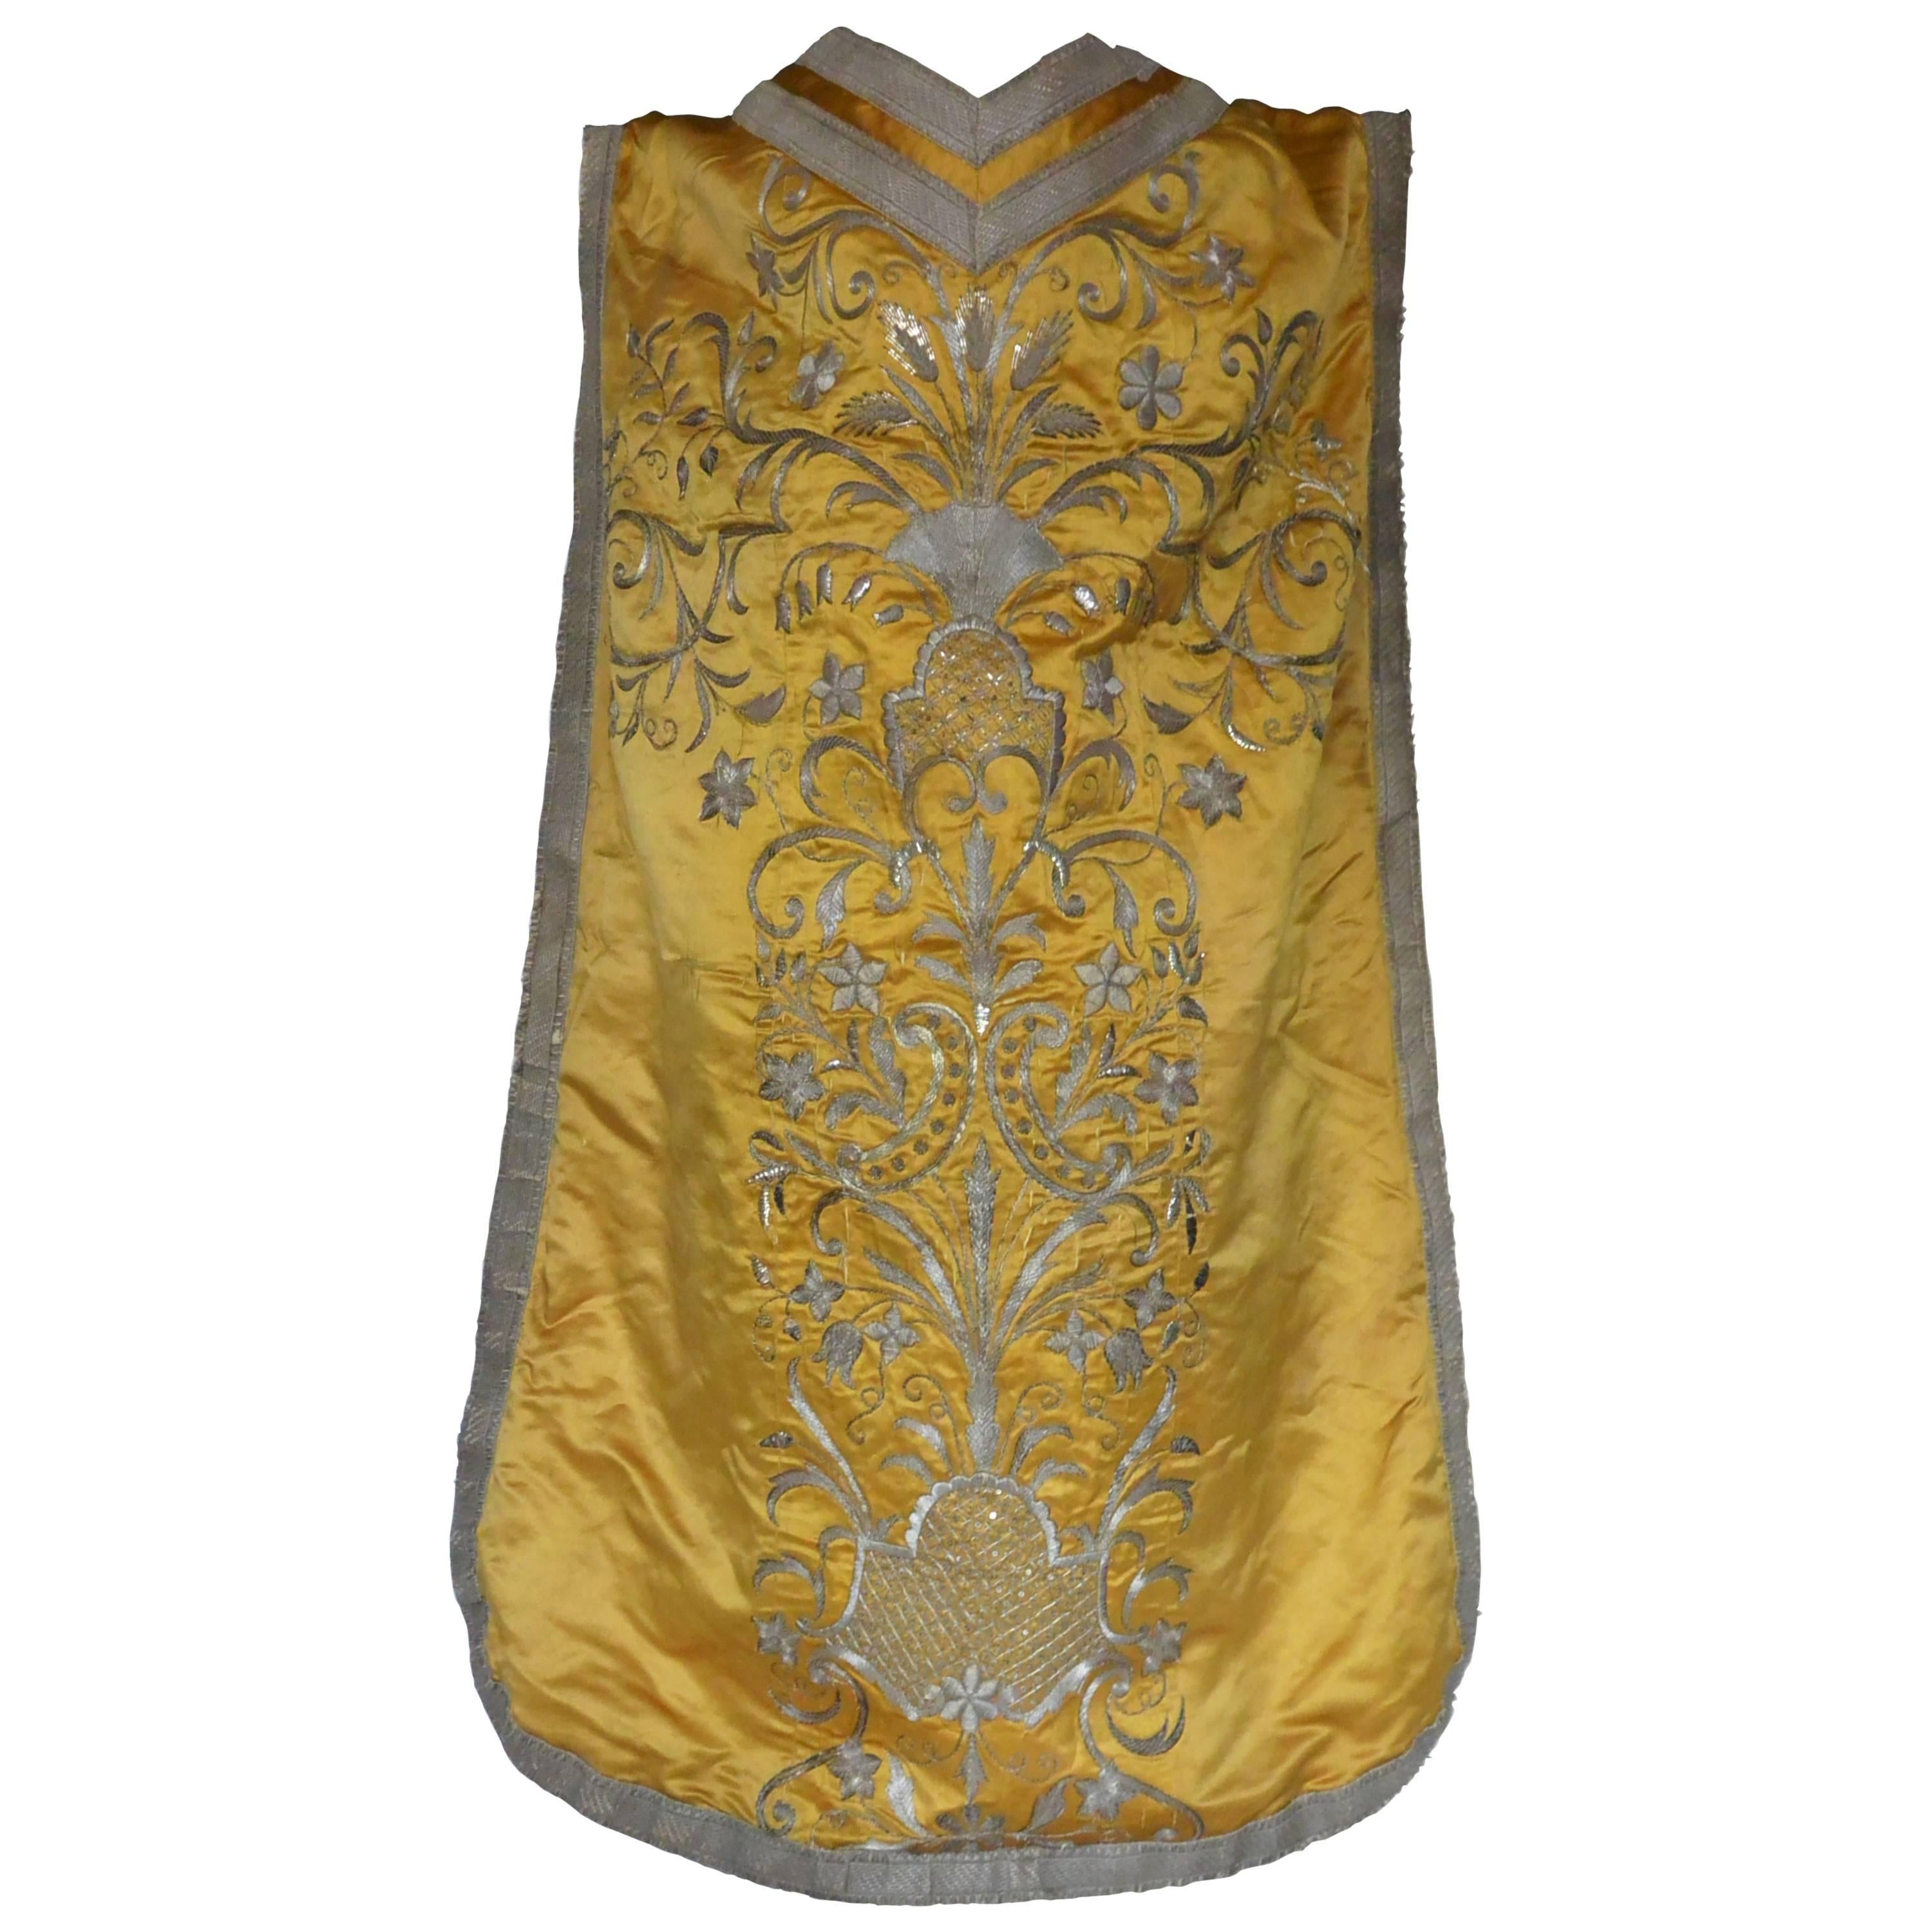 Silver Thread Embroidered Yellow Silk Chasuble Cape